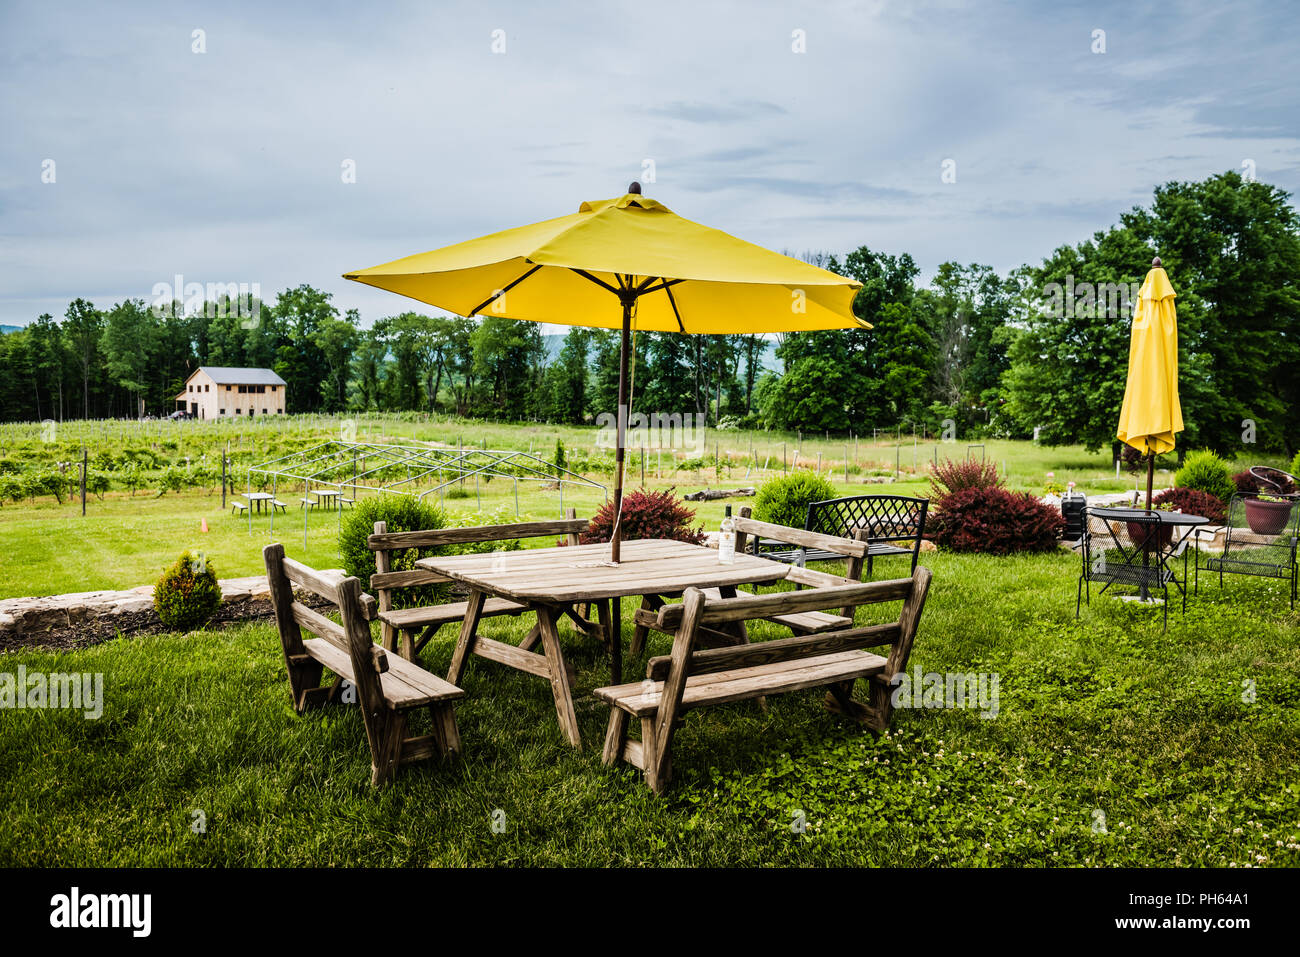 Pine Bush, NY /USA - June 9, 2018: Picnic table overlooking vineyard at Christopher Jacobs Winery. Stock Photo